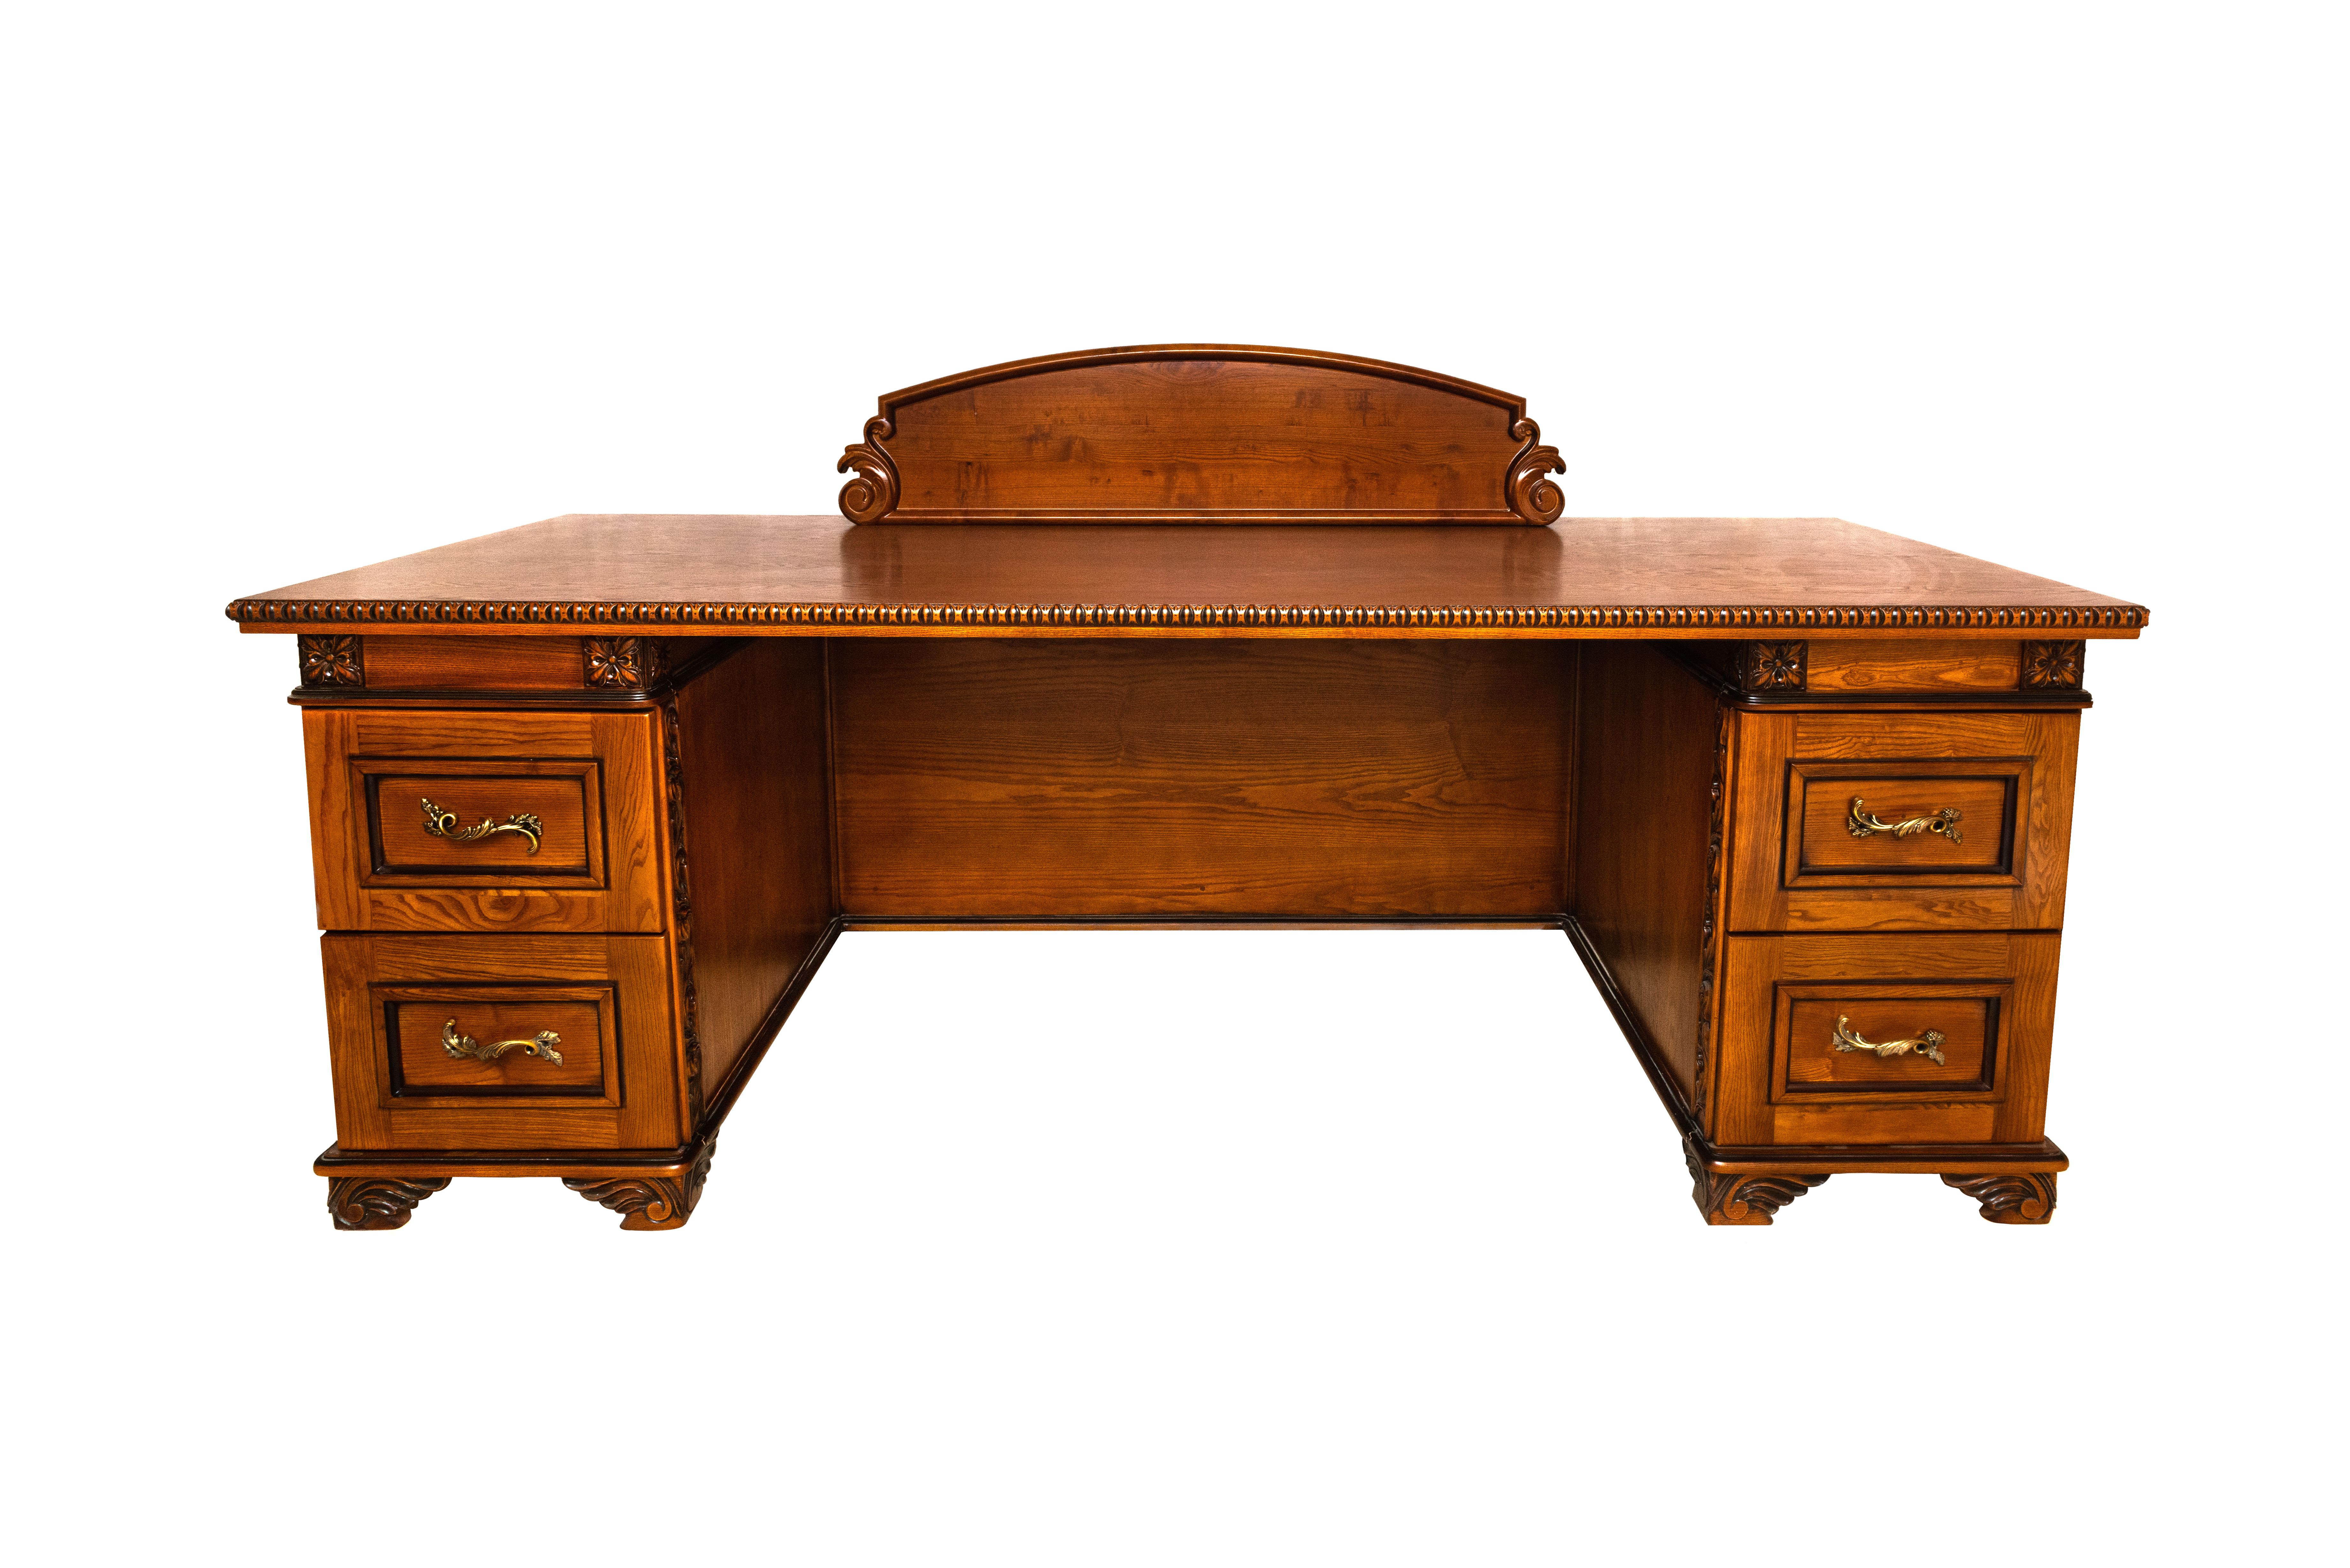 Hand-carved executive desk. New – Brand-new, unused item, not previously owned. Shows absolutely no signs of wear.

Dimensions

H 31.89 in. x W 87.40 in. x D 37 in.
H. 81 cm x W 222 cm x D 94 cm

DATE OF MANUFACTURE 2019

The finest natural